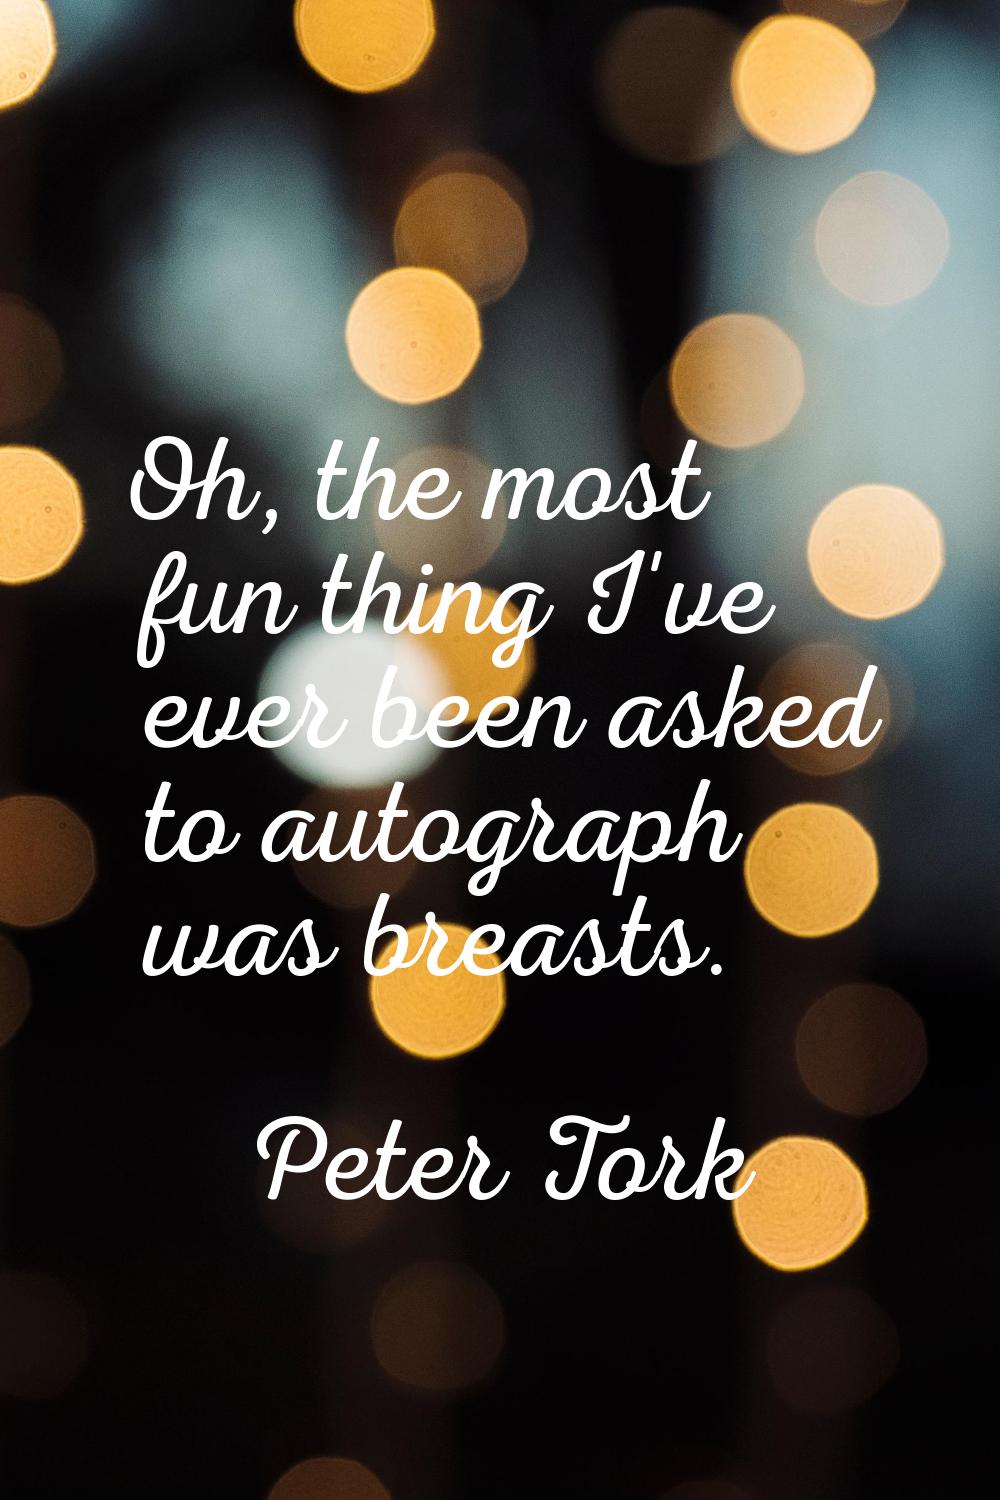 Oh, the most fun thing I've ever been asked to autograph was breasts.